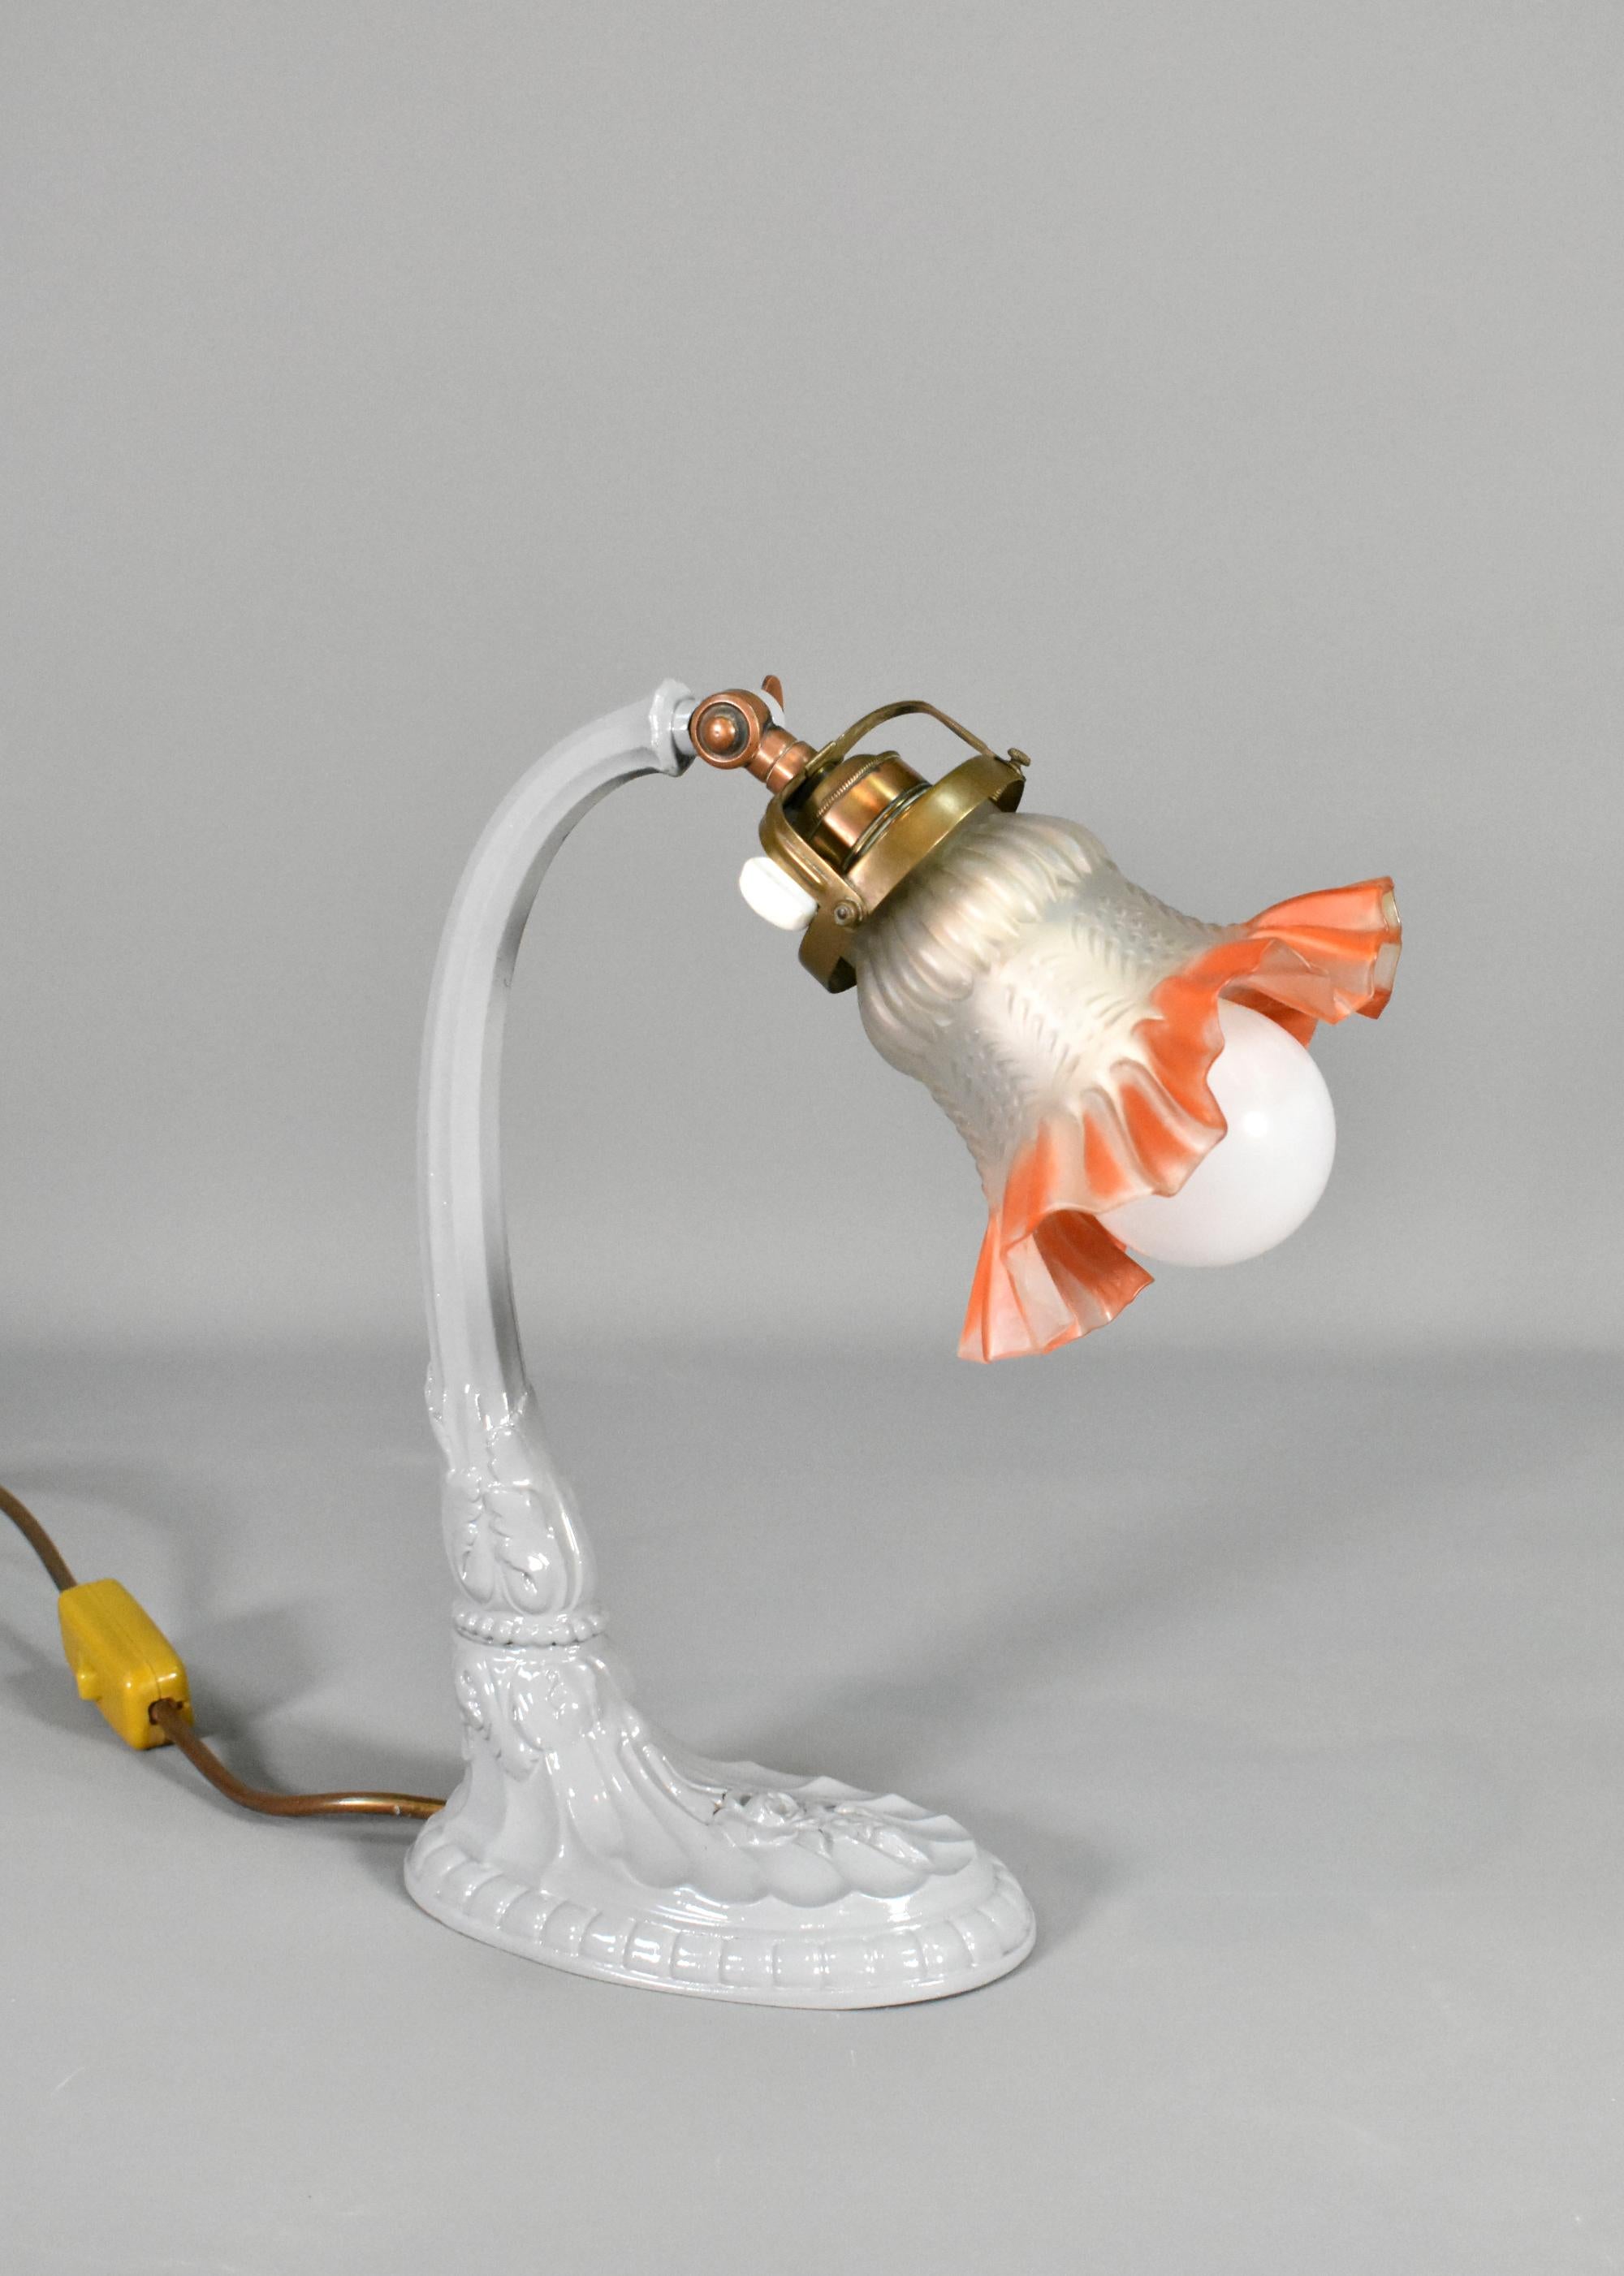 French Art Nouveau Desk Lamp

A beautiful and elegant swan-shaped desk lamp, featuring flowers and leaves, which are classic motifs from the Art Nouveau period.

The gently curved neck / support holds a copper and brass lamp holder and a cage for